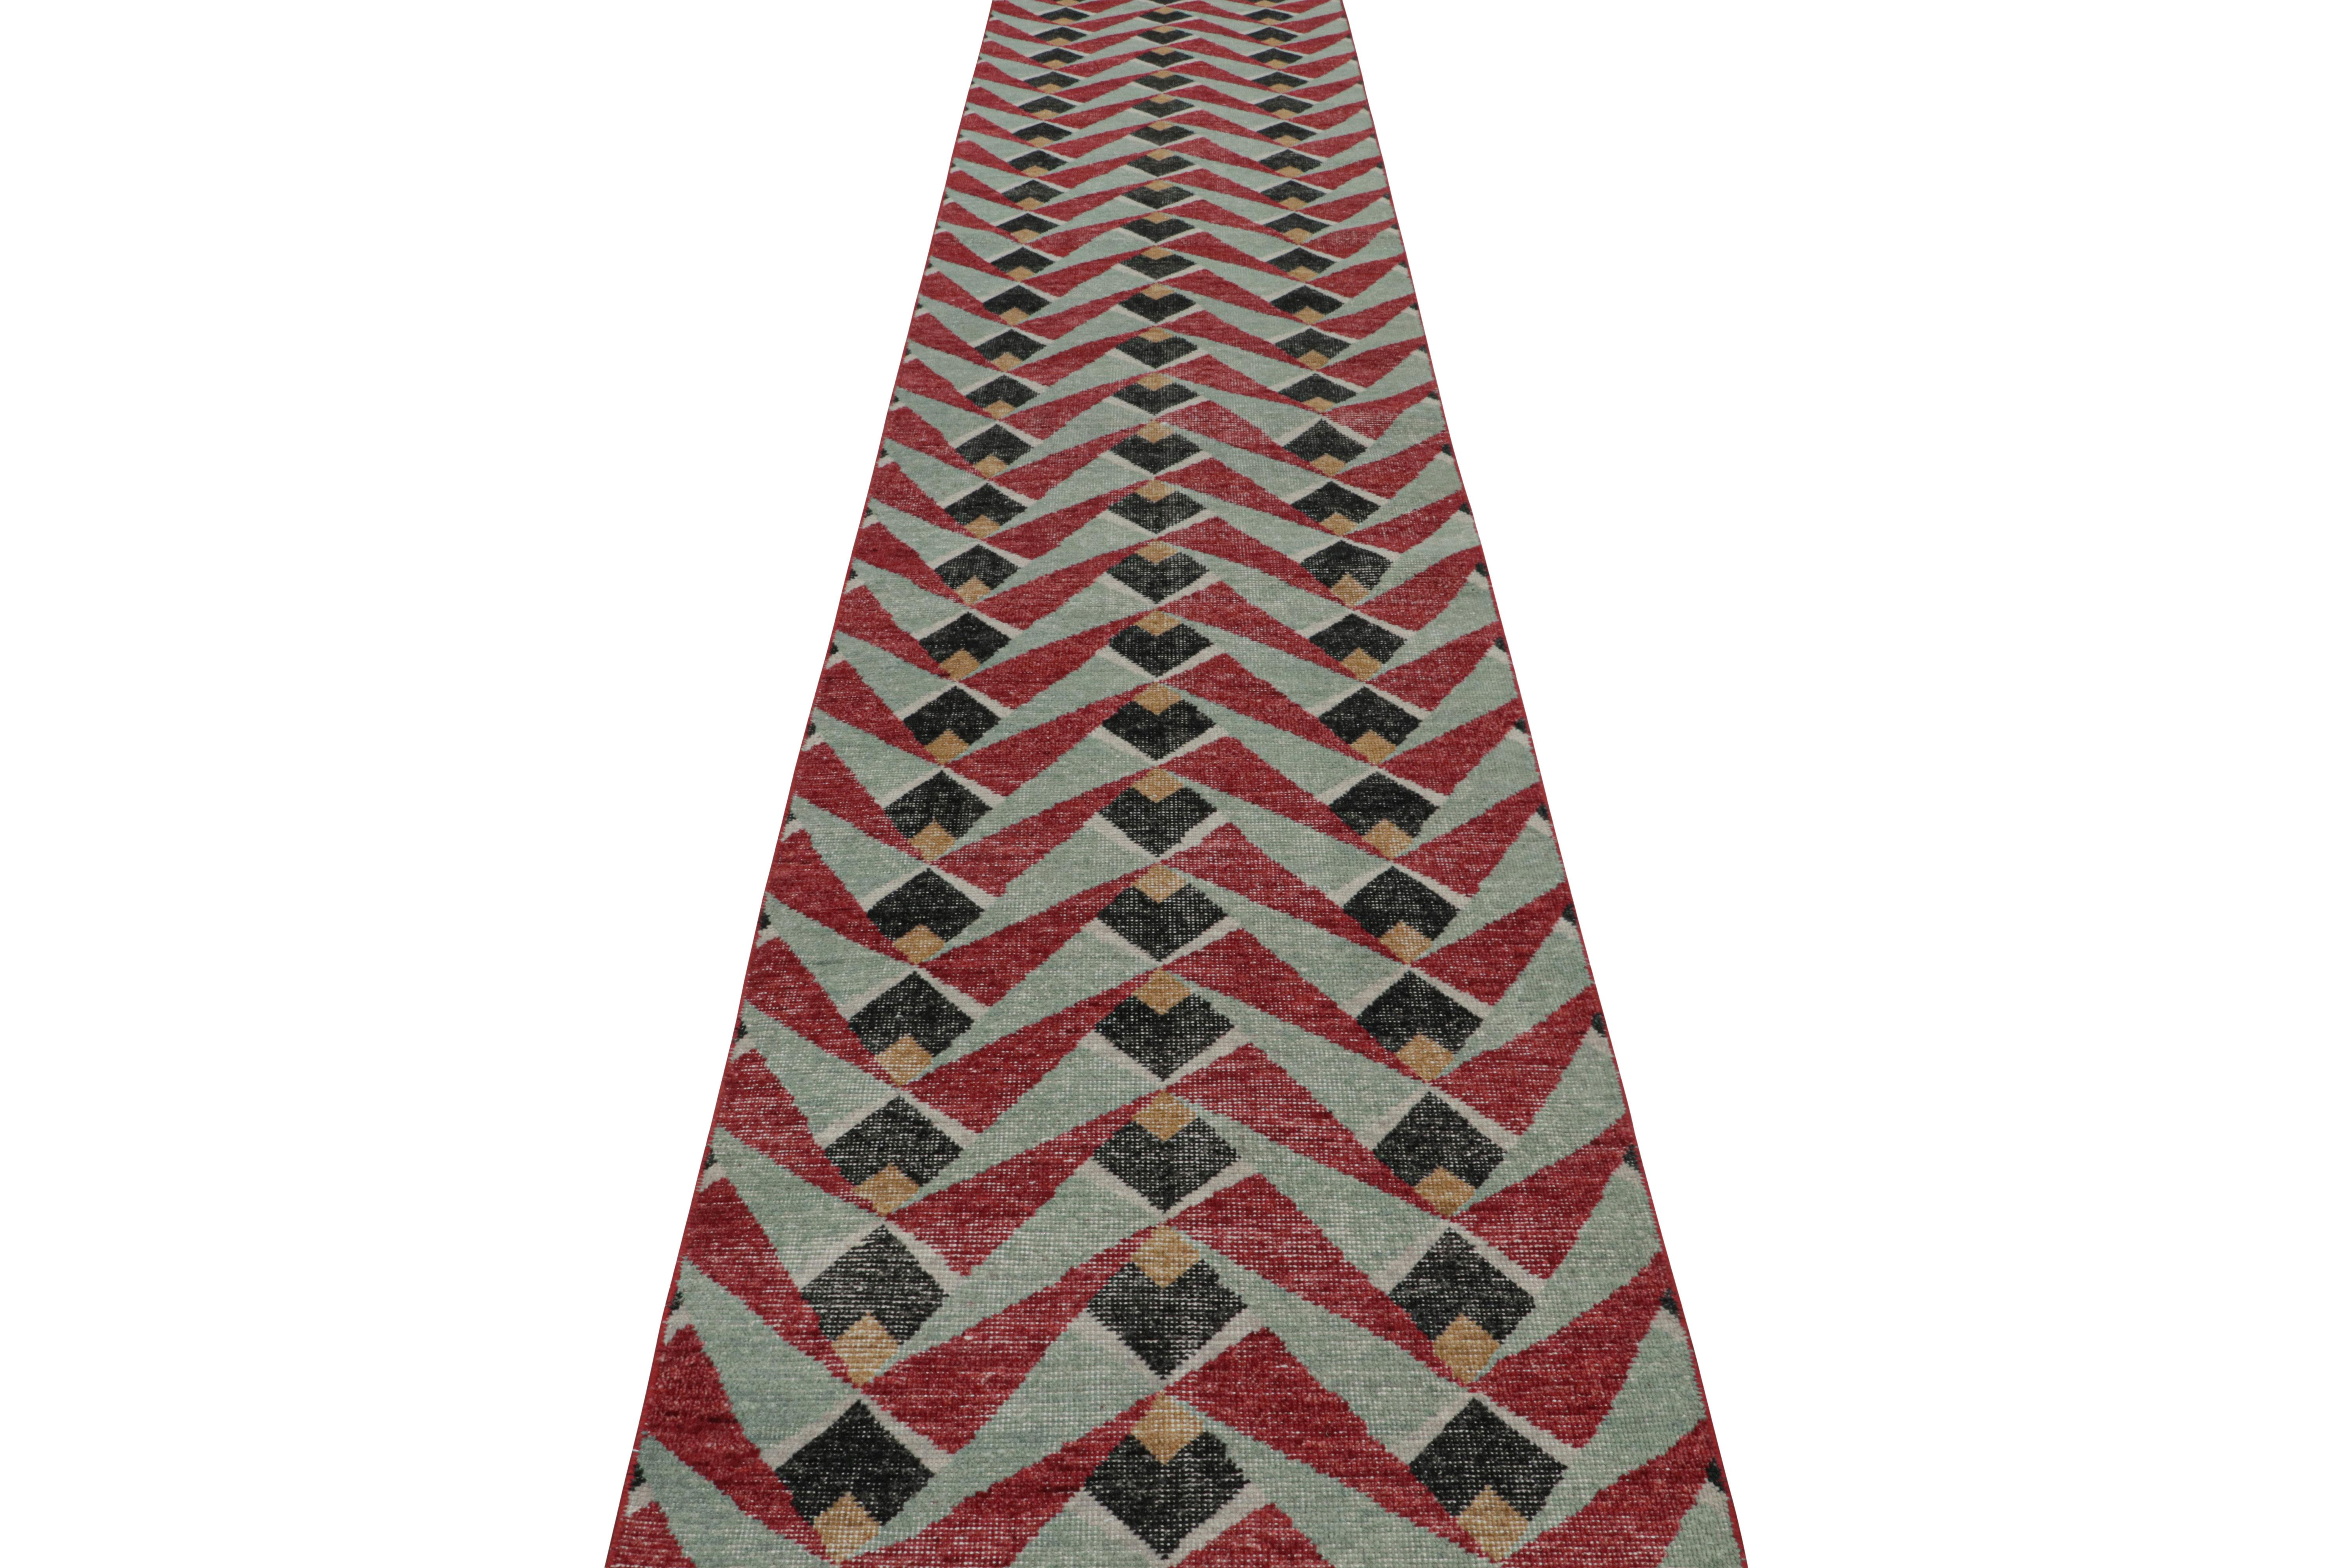 Hand-knotted in wool, this 3x16 rug is a new addition to the Homage Collection by Rug & Kilim.

On the Design:

Admirers of the craft may appreciate a subtle influence from Afghan Mauri rugs in this contemporary, almost Deco-esque design. Red and